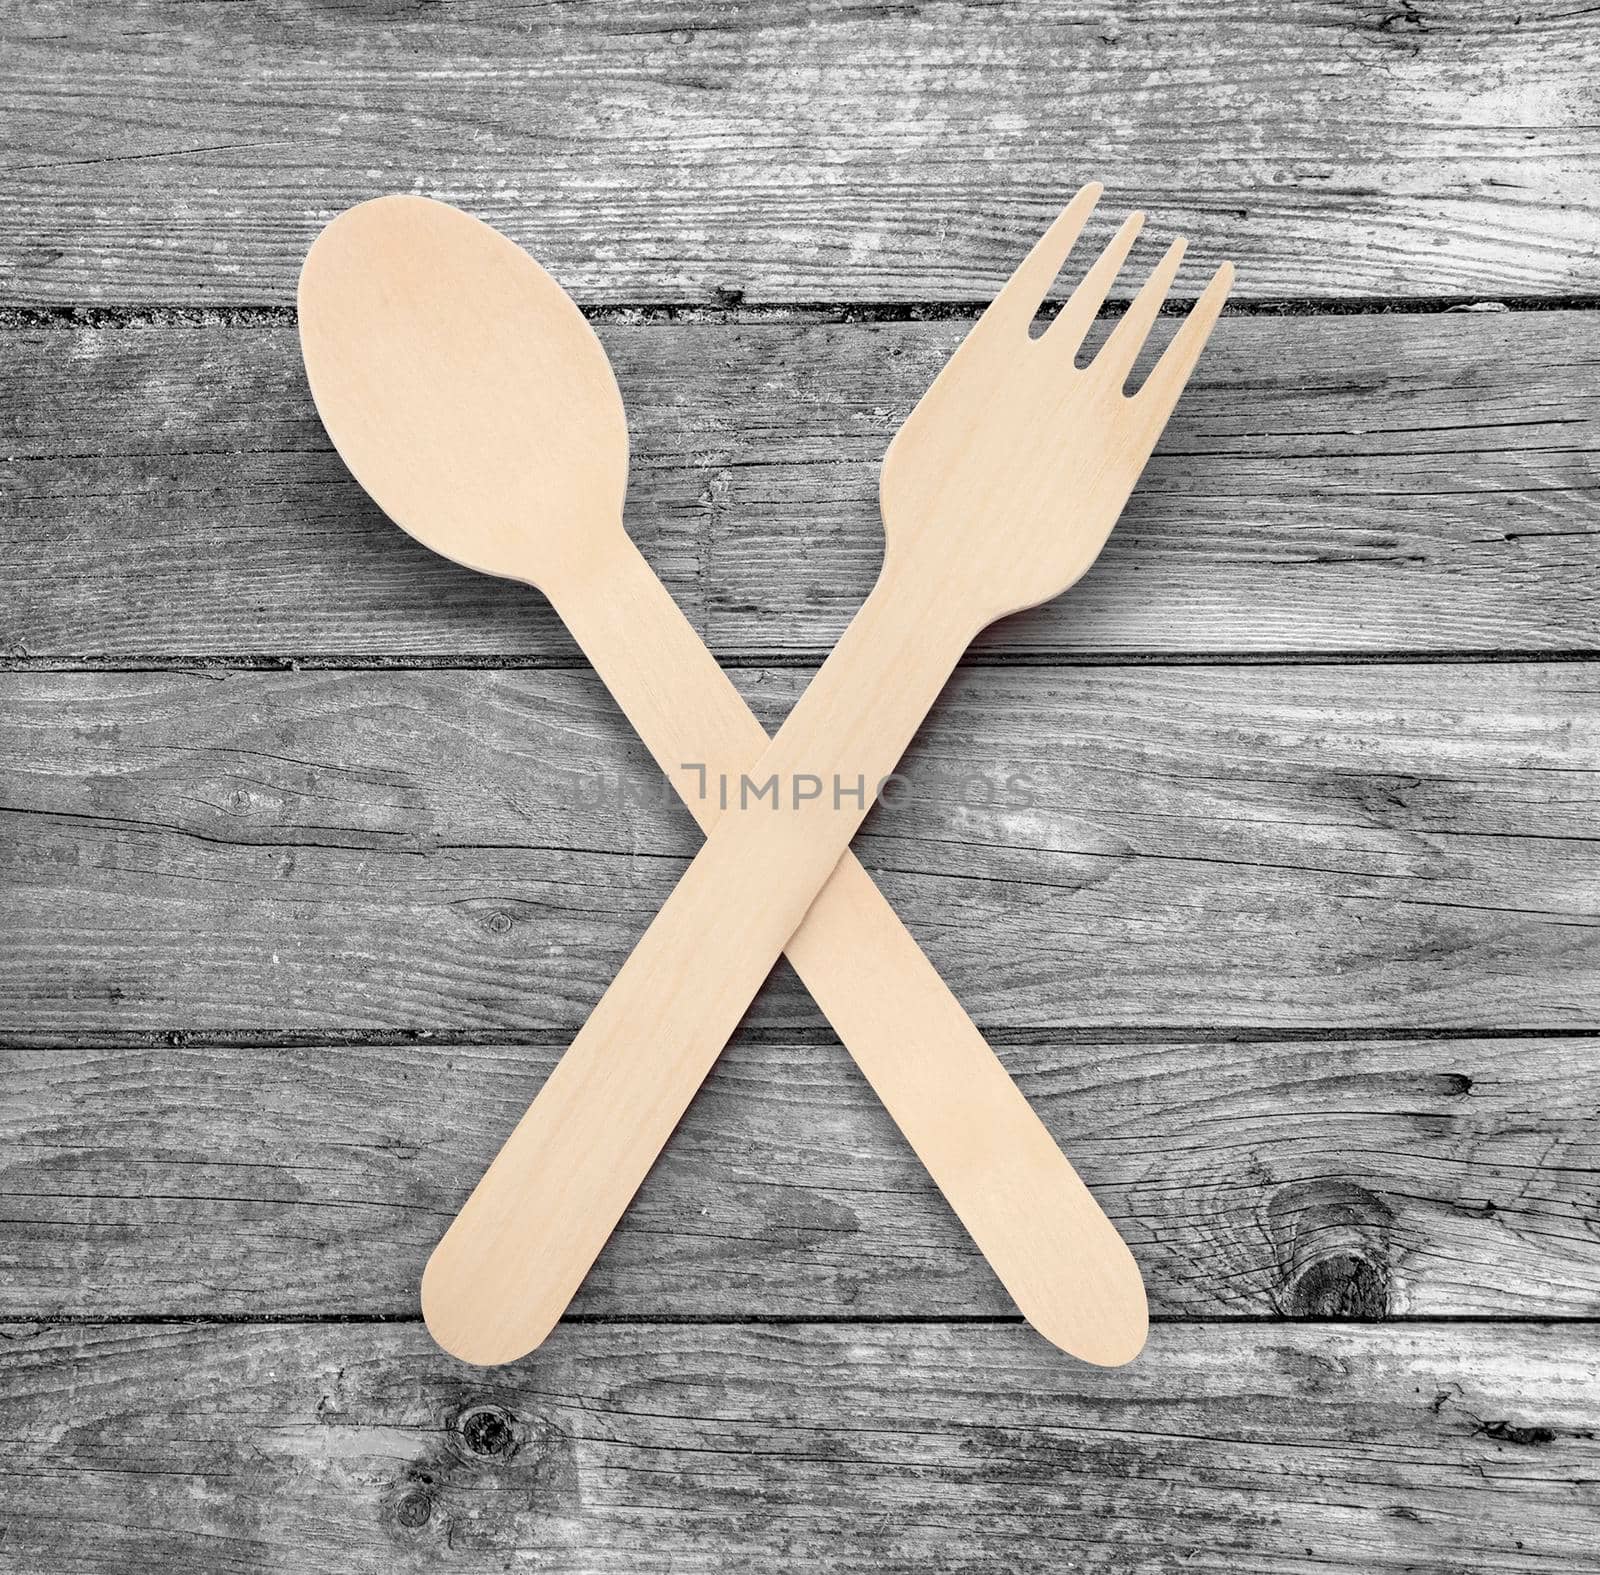 Wooden spoon and fork isolated on wooden background by SlayCer